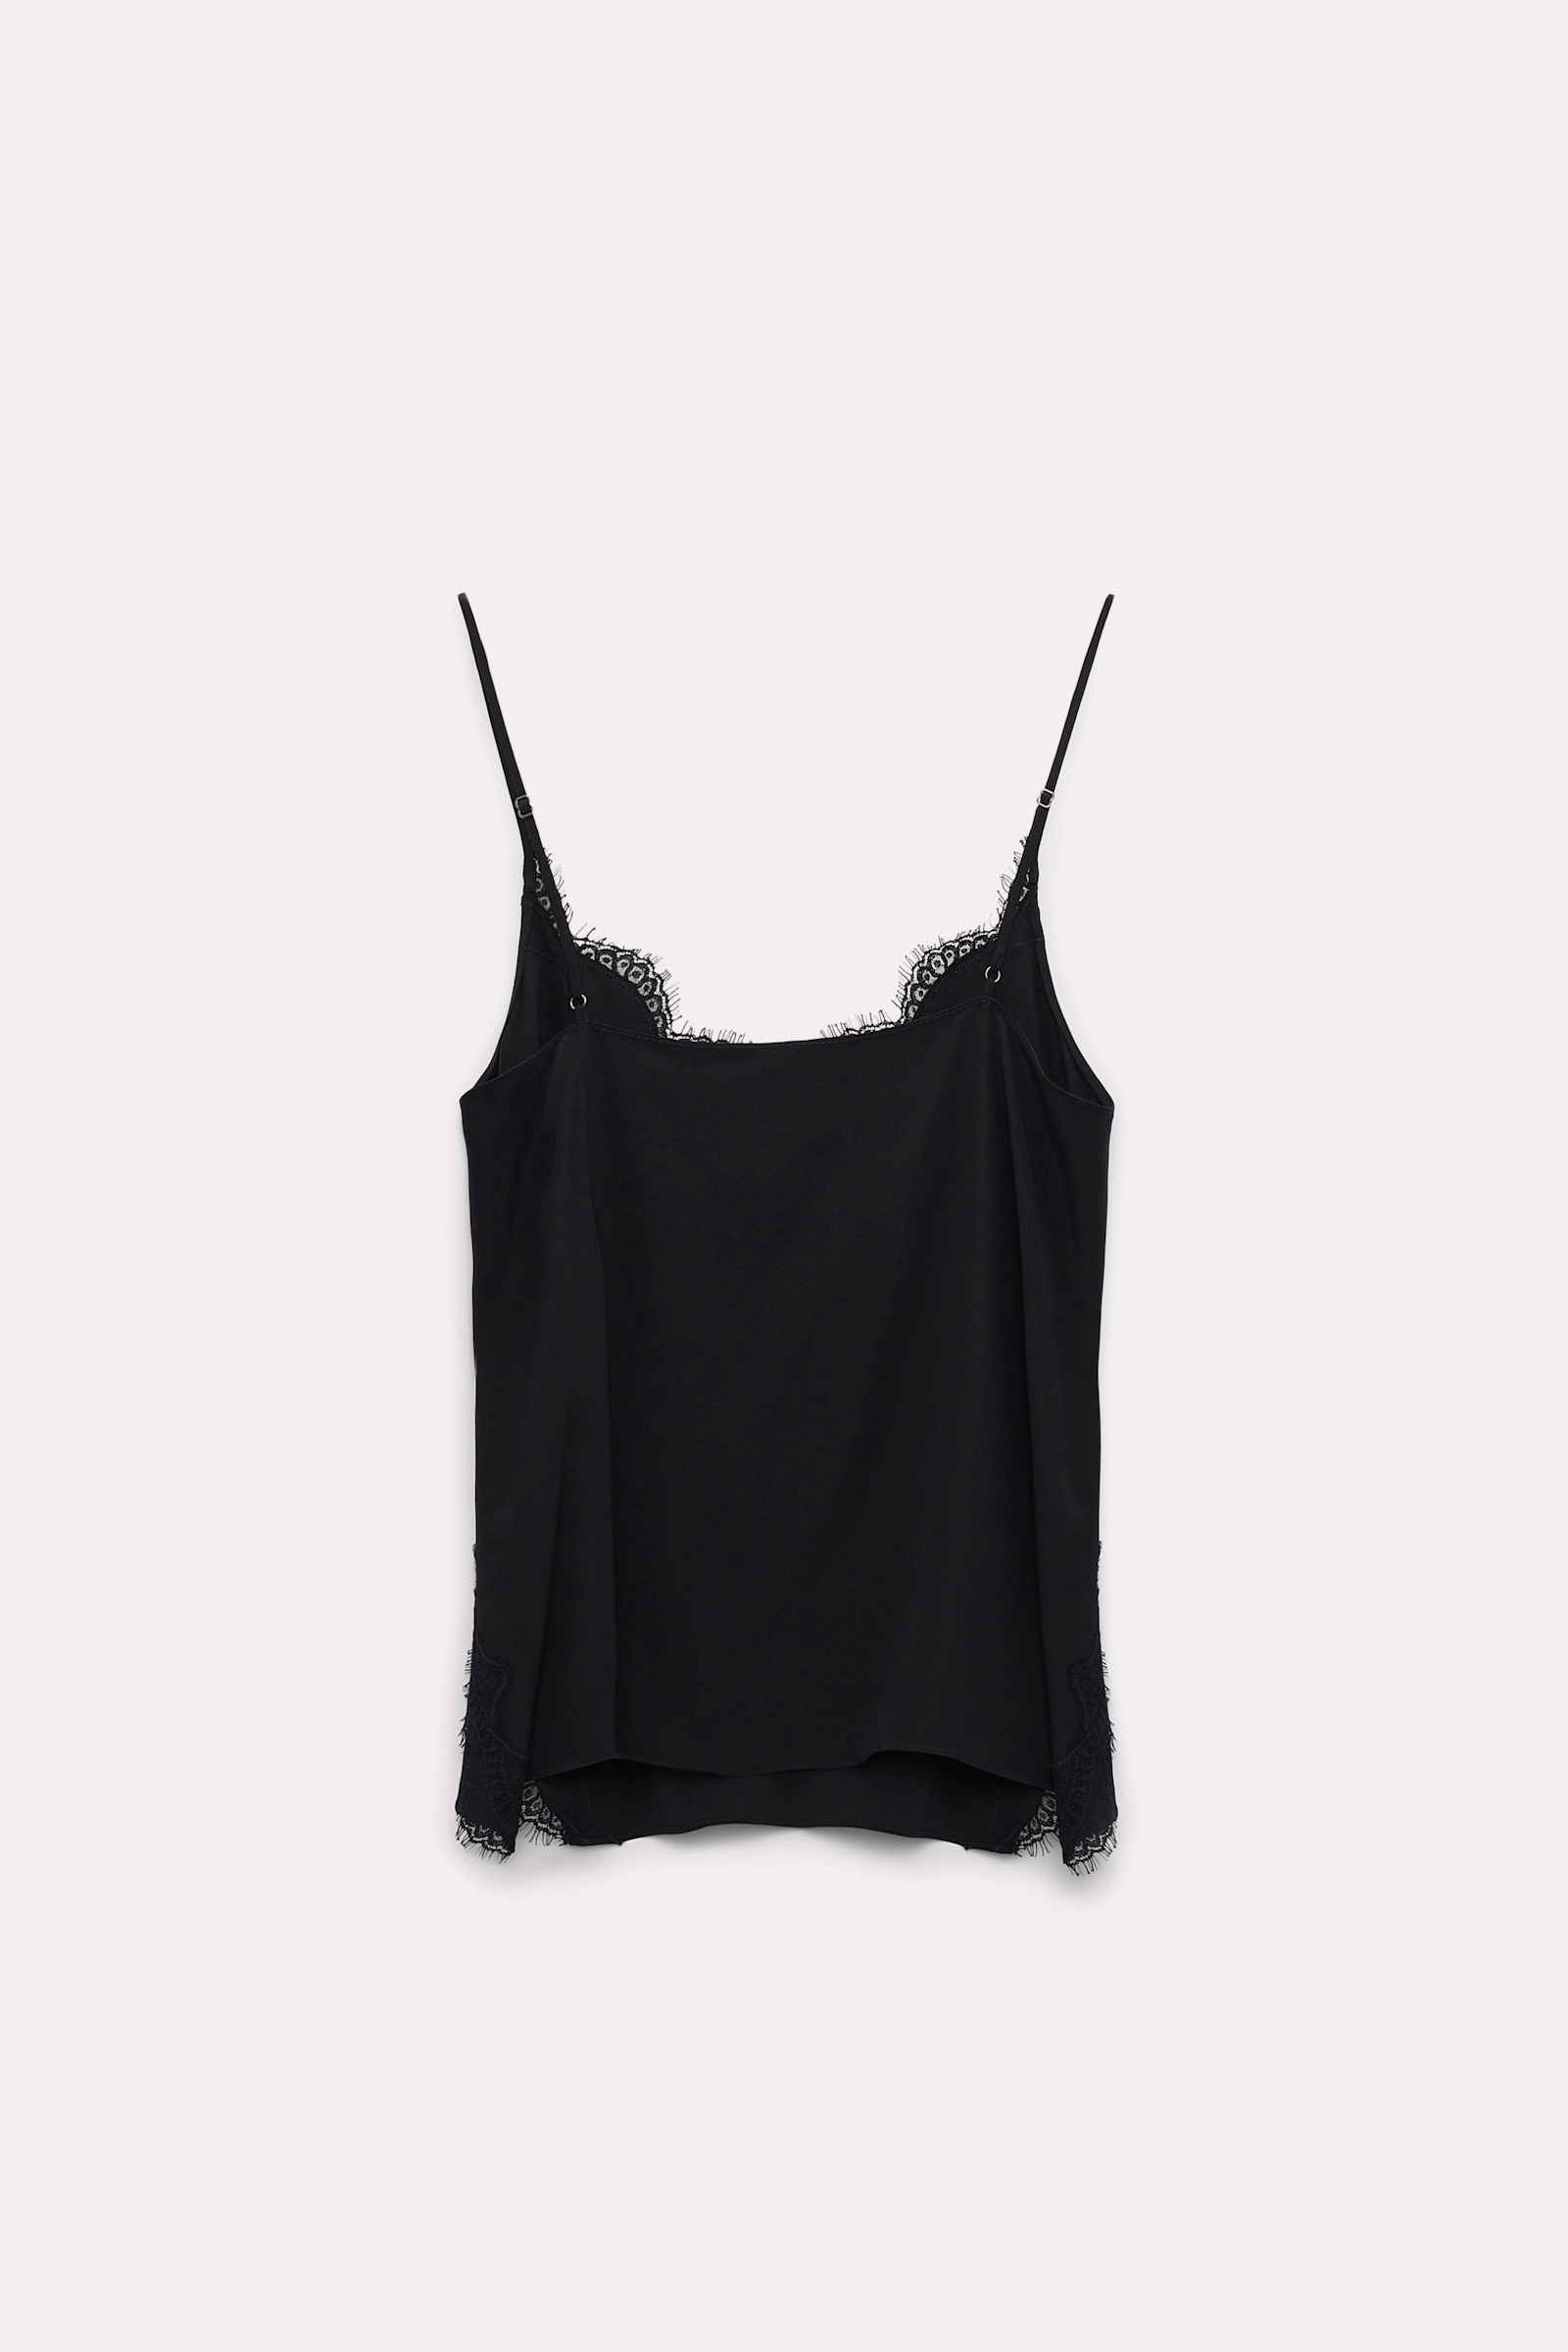 Dorothee Schumacher Silk camisole with lace pure black